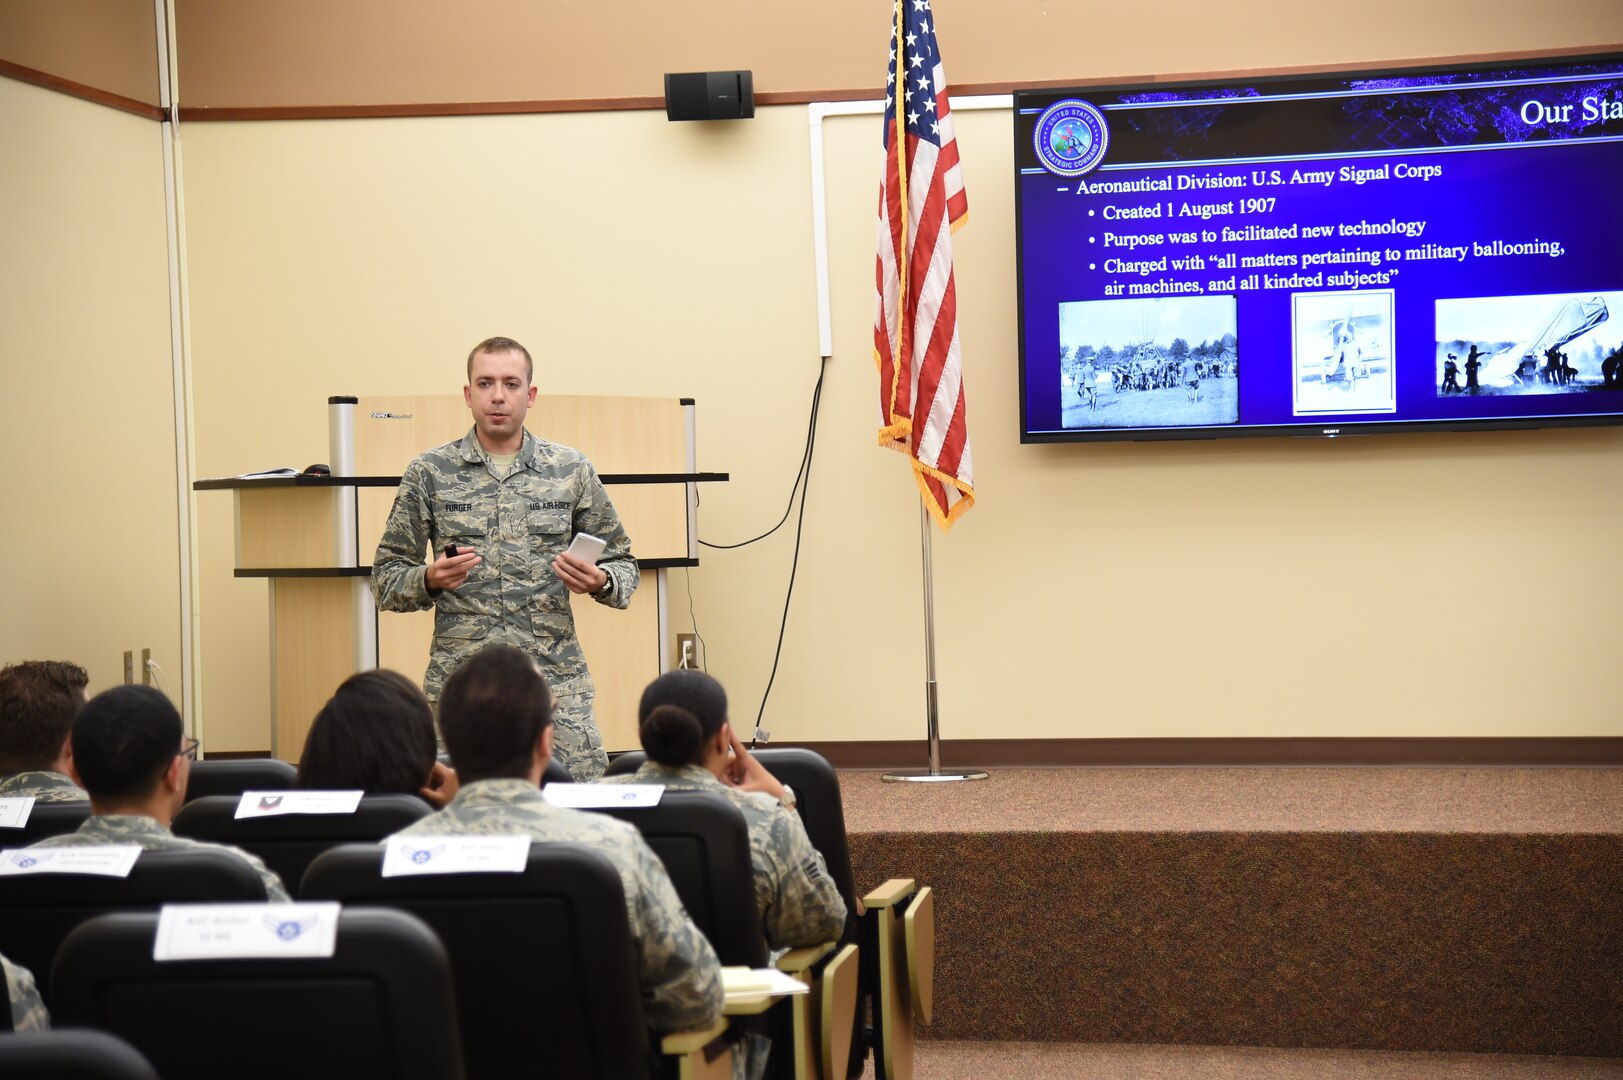 U.S. Air Force Tech. Sgt. Michael Furger, noncommissioned officer in charge of source collection management, teaches Offutt Air Force Base, Neb., junior-enlisted military members about U.S. Air Force history during the inaugural Junior Enlisted Professional Development Seminar, July 19, 2018. During the seminar, junior-enlisted members discussed a variety of topics with USSTRATCOM non-commissioned officers, petty officers and senior leaders. Topics included leadership, junior-enlisted roles and responsibilities, mentoring, military traditions and history, educational benefits, and customs and courtesies. USSTRATCOM has global responsibilities assigned through the Unified Command Plan that include strategic deterrence, nuclear operations, space operations, joint electromagnetic spectrum operations, global strike, missile defense, and analysis and targeting.